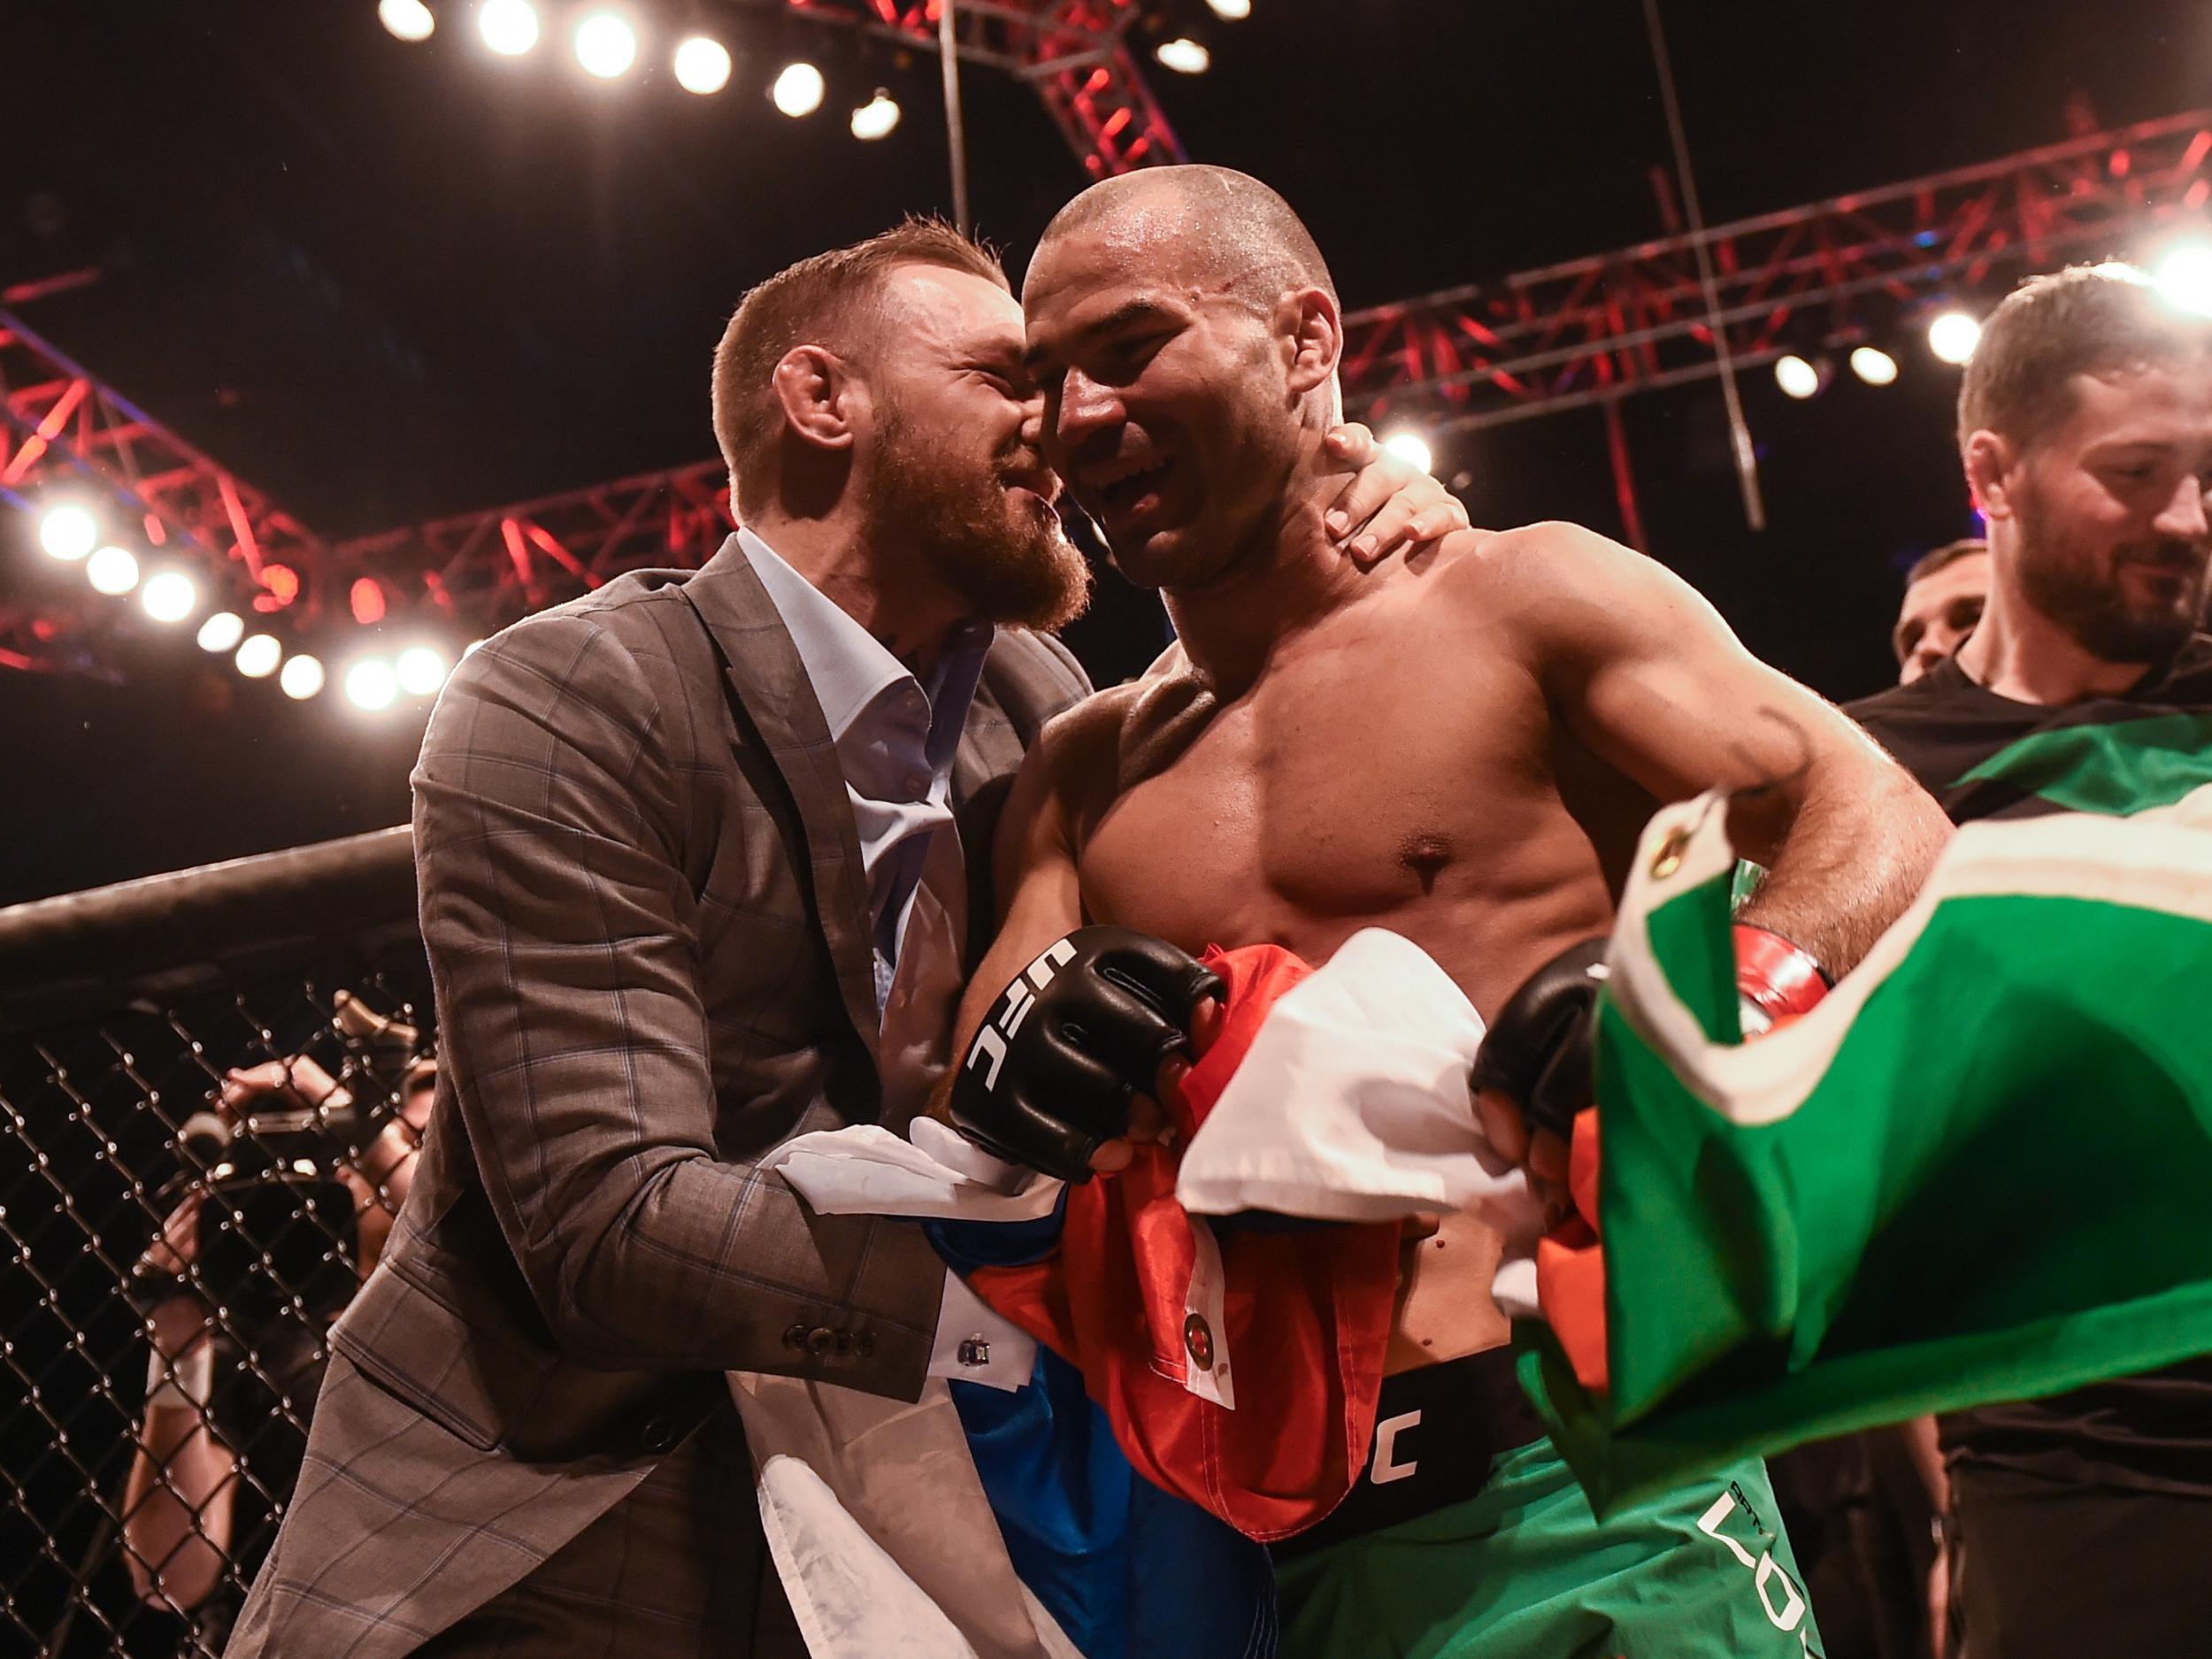 &#13;
Lobov has backed his training partner to win the contest &#13;